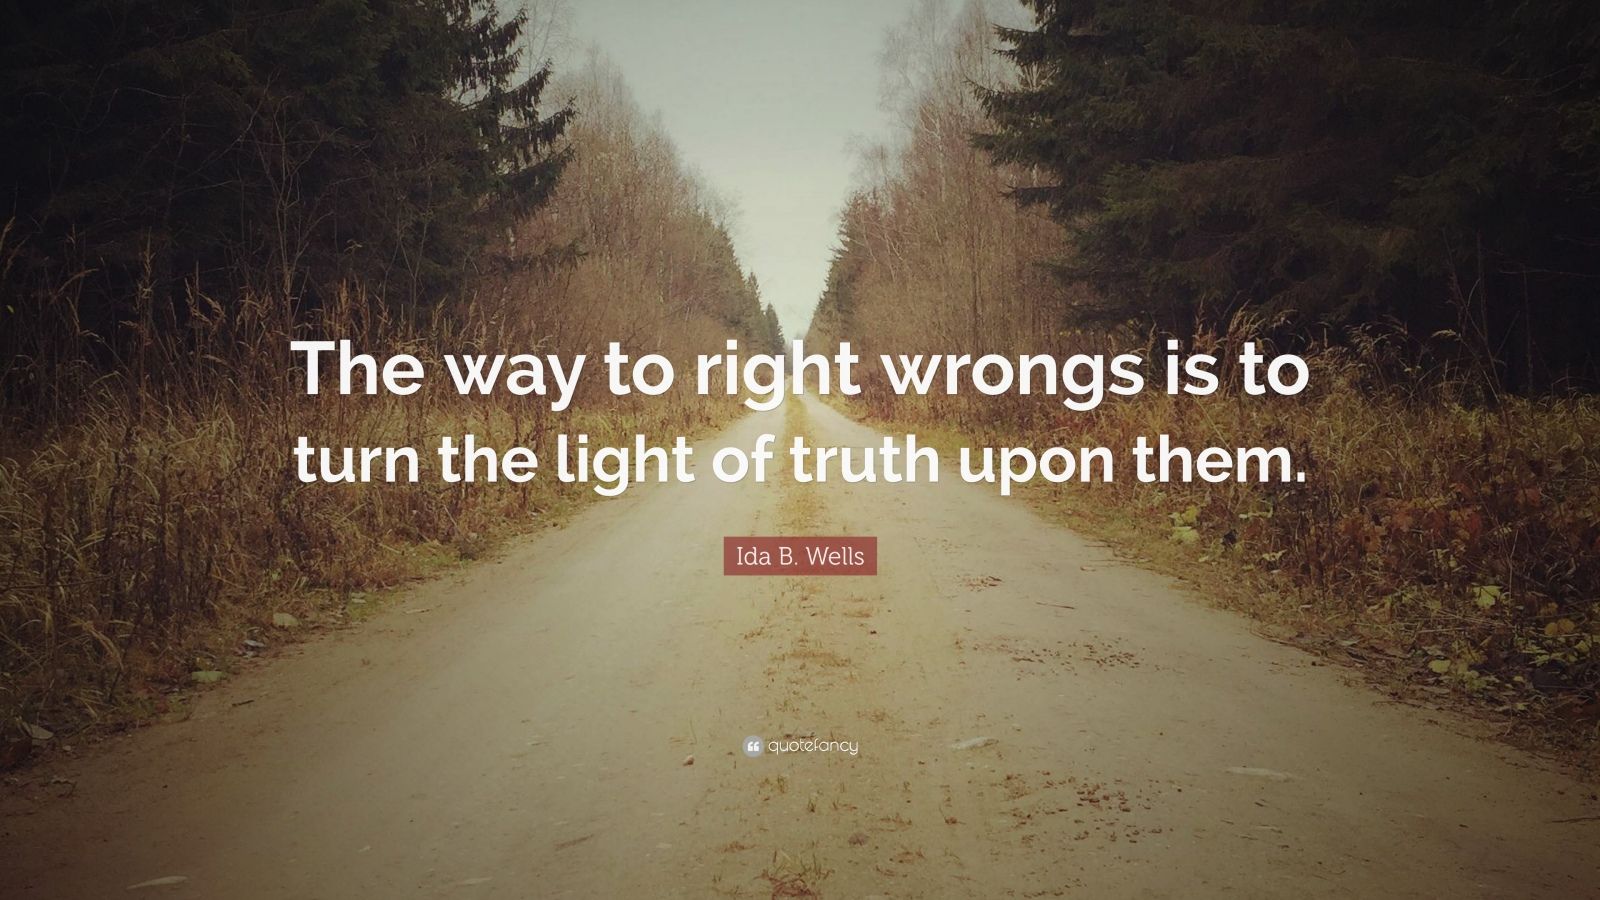 Ida B. Wells Quote: “The way to right wrongs is to turn the light of